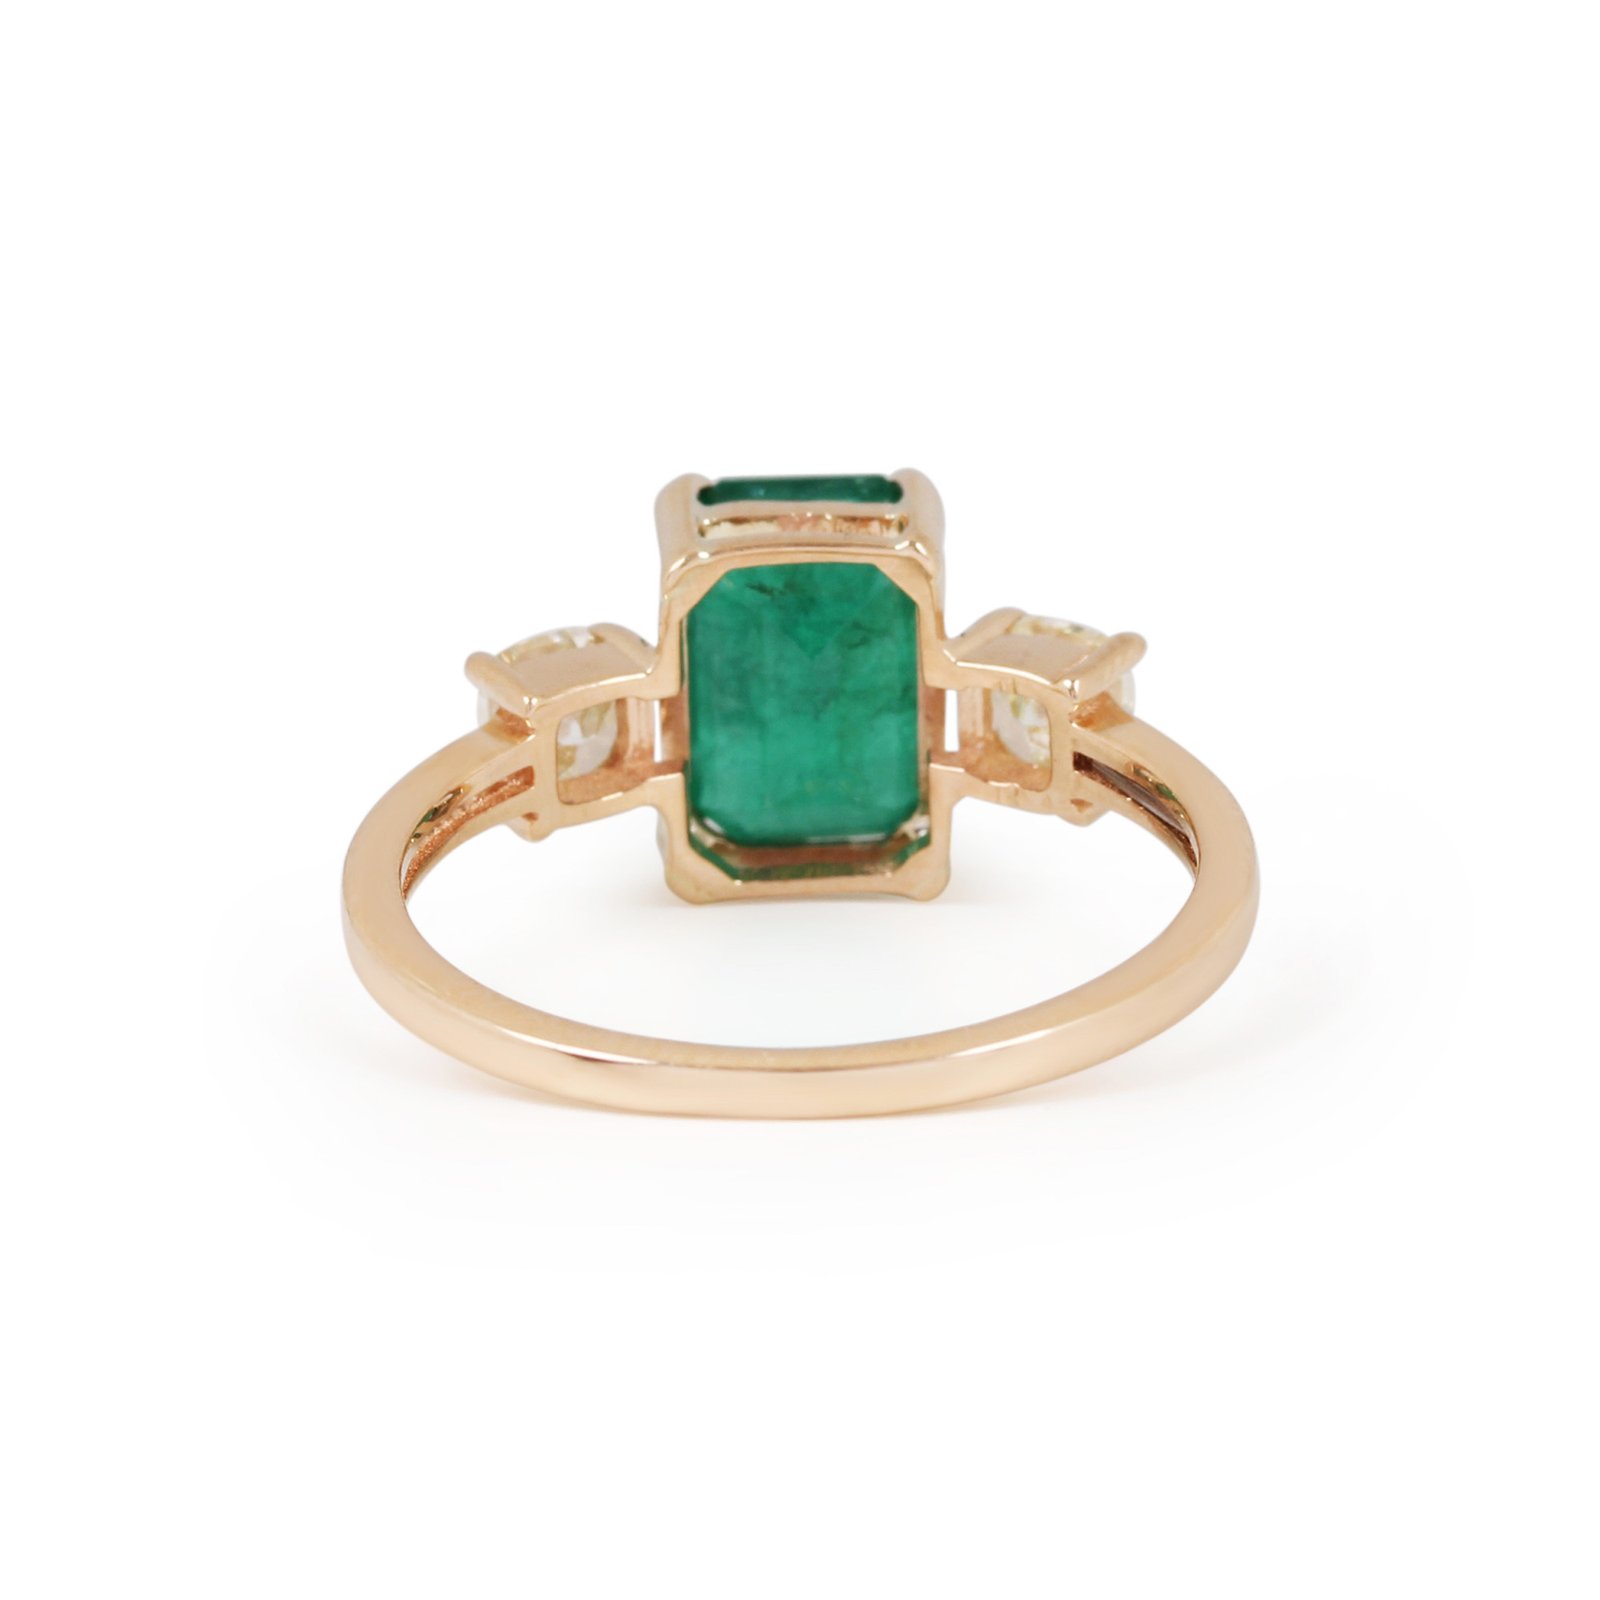 Natural Emerald Diamond 14K Solid Gold Ring Jewelry